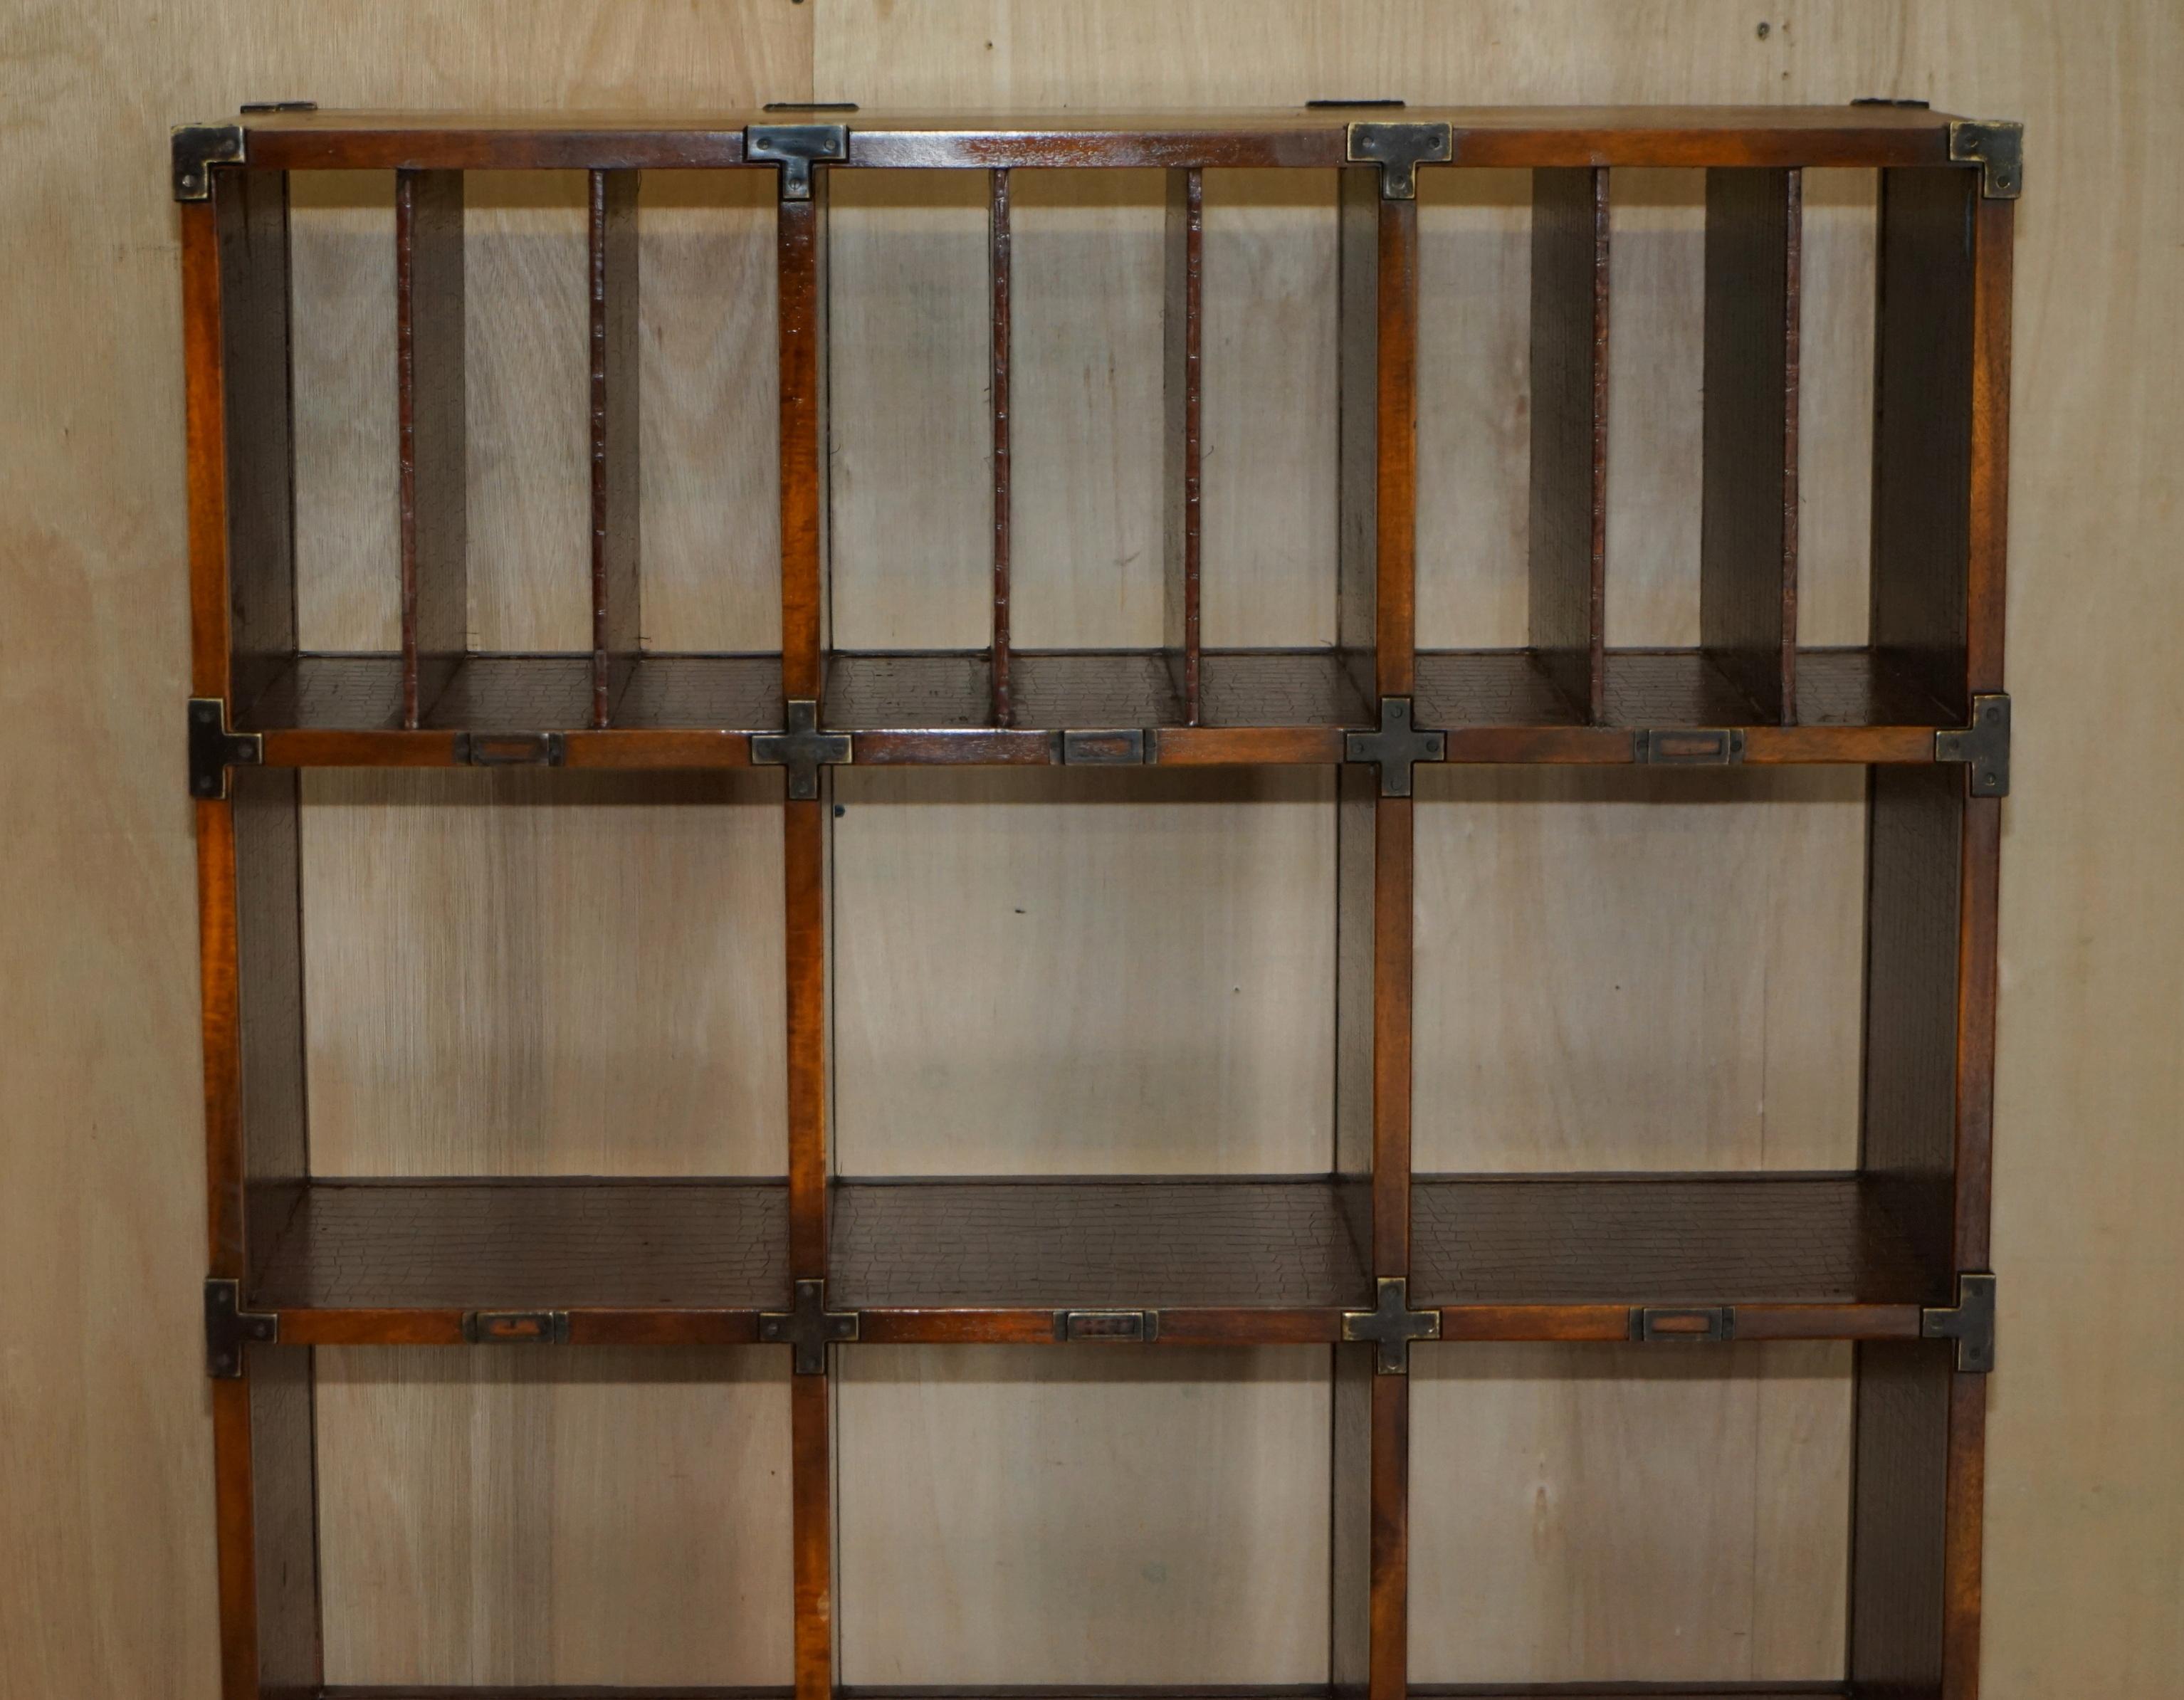 PAIR OF CROCODILE LEATHER Offene LiBRARY-BOOKCASES MIT DRAWERS & RECORD SLOTS (Europäisch) im Angebot